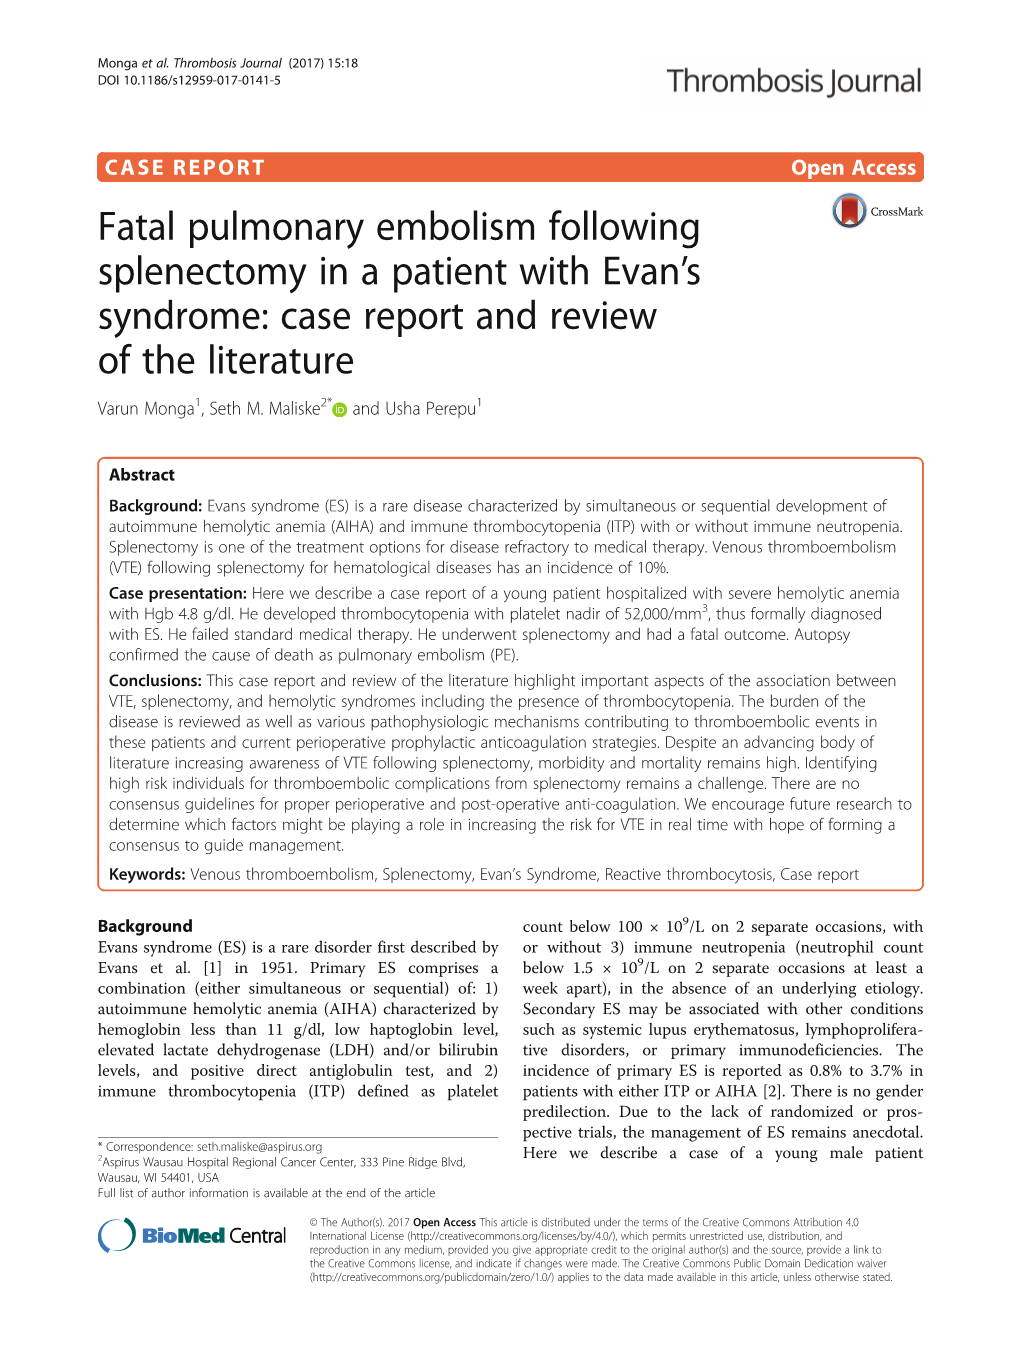 Fatal Pulmonary Embolism Following Splenectomy in a Patient with Evan’S Syndrome: Case Report and Review of the Literature Varun Monga1, Seth M